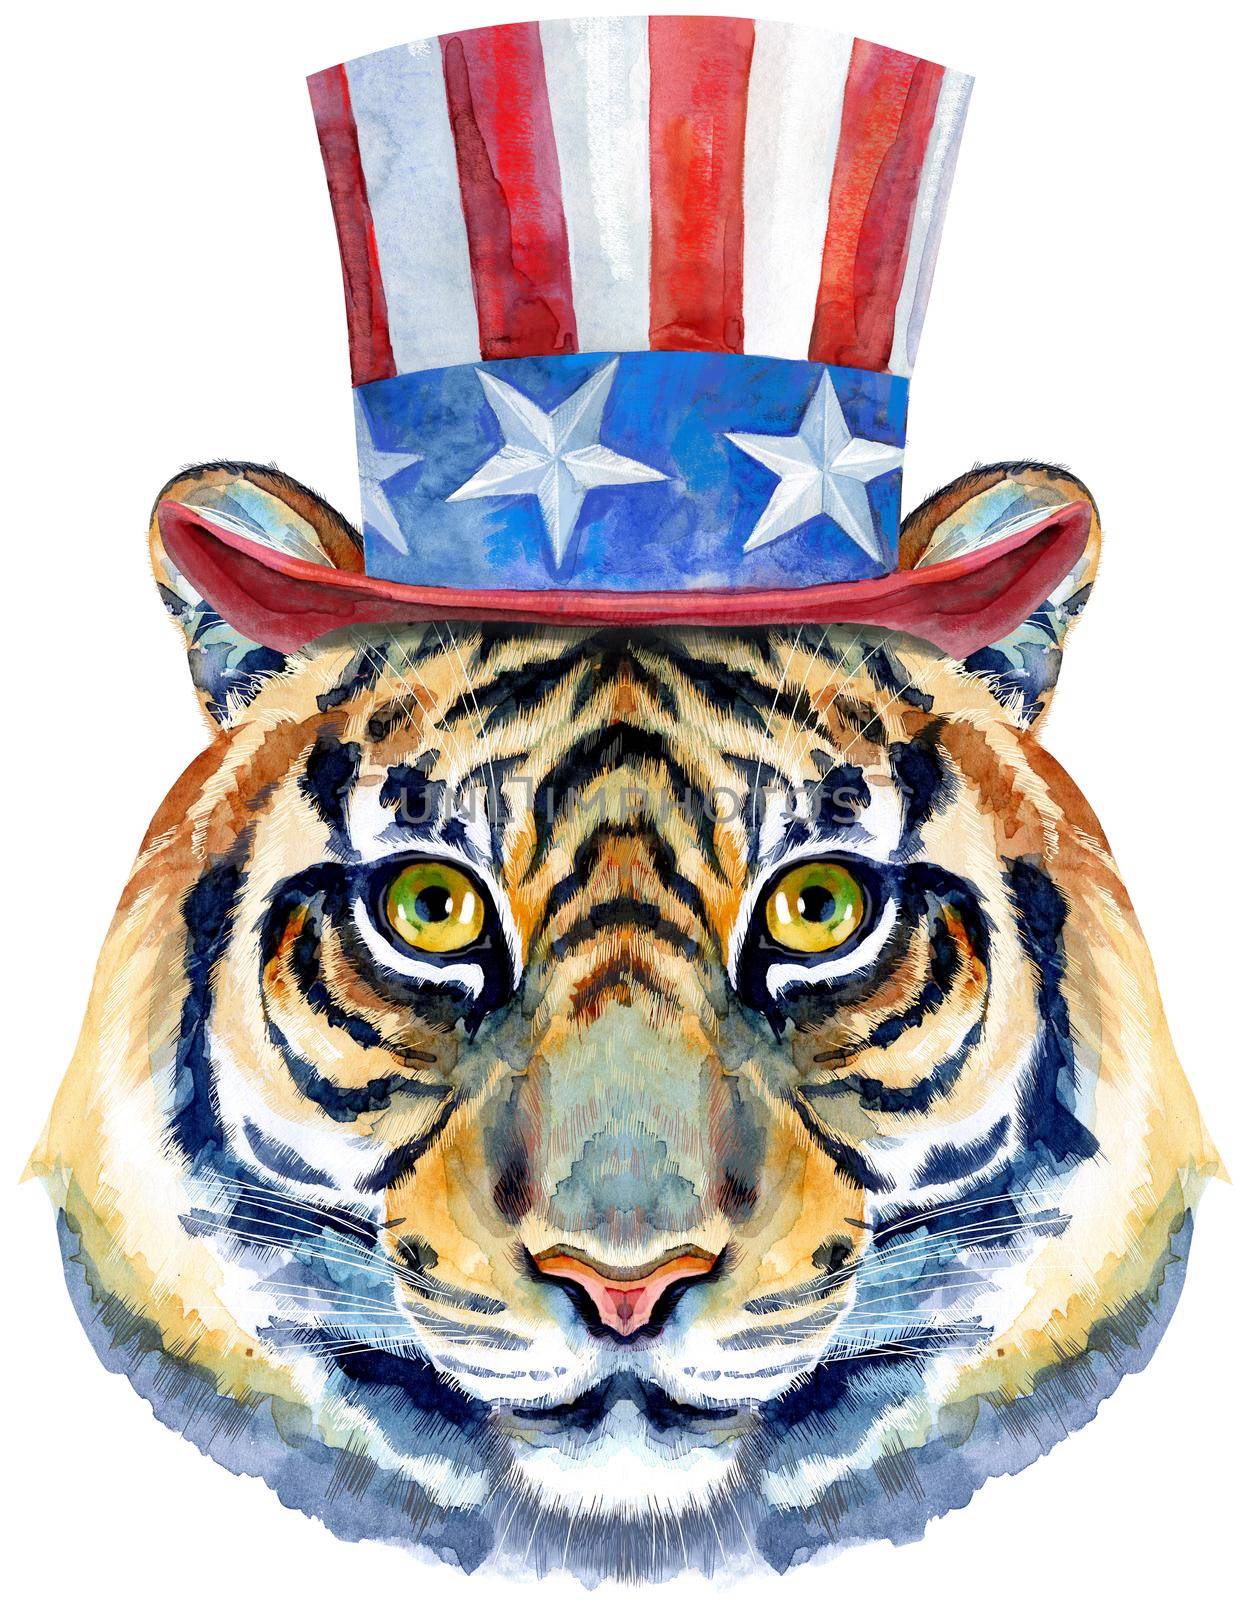 Tiger head with Uncle Sam hat horoscope character isolated on white background.